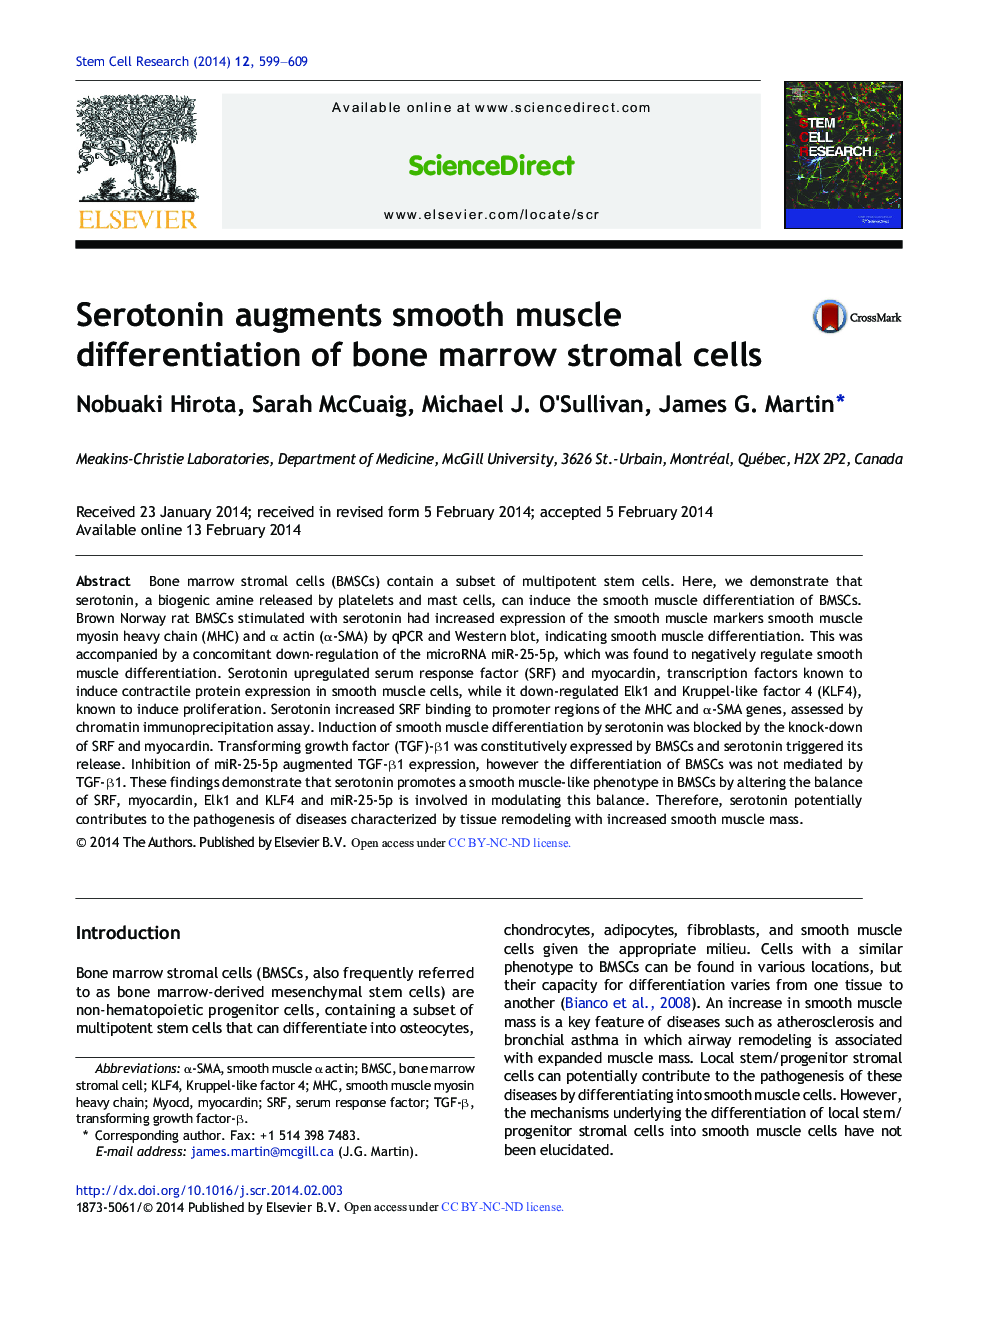 Serotonin augments smooth muscle differentiation of bone marrow stromal cells